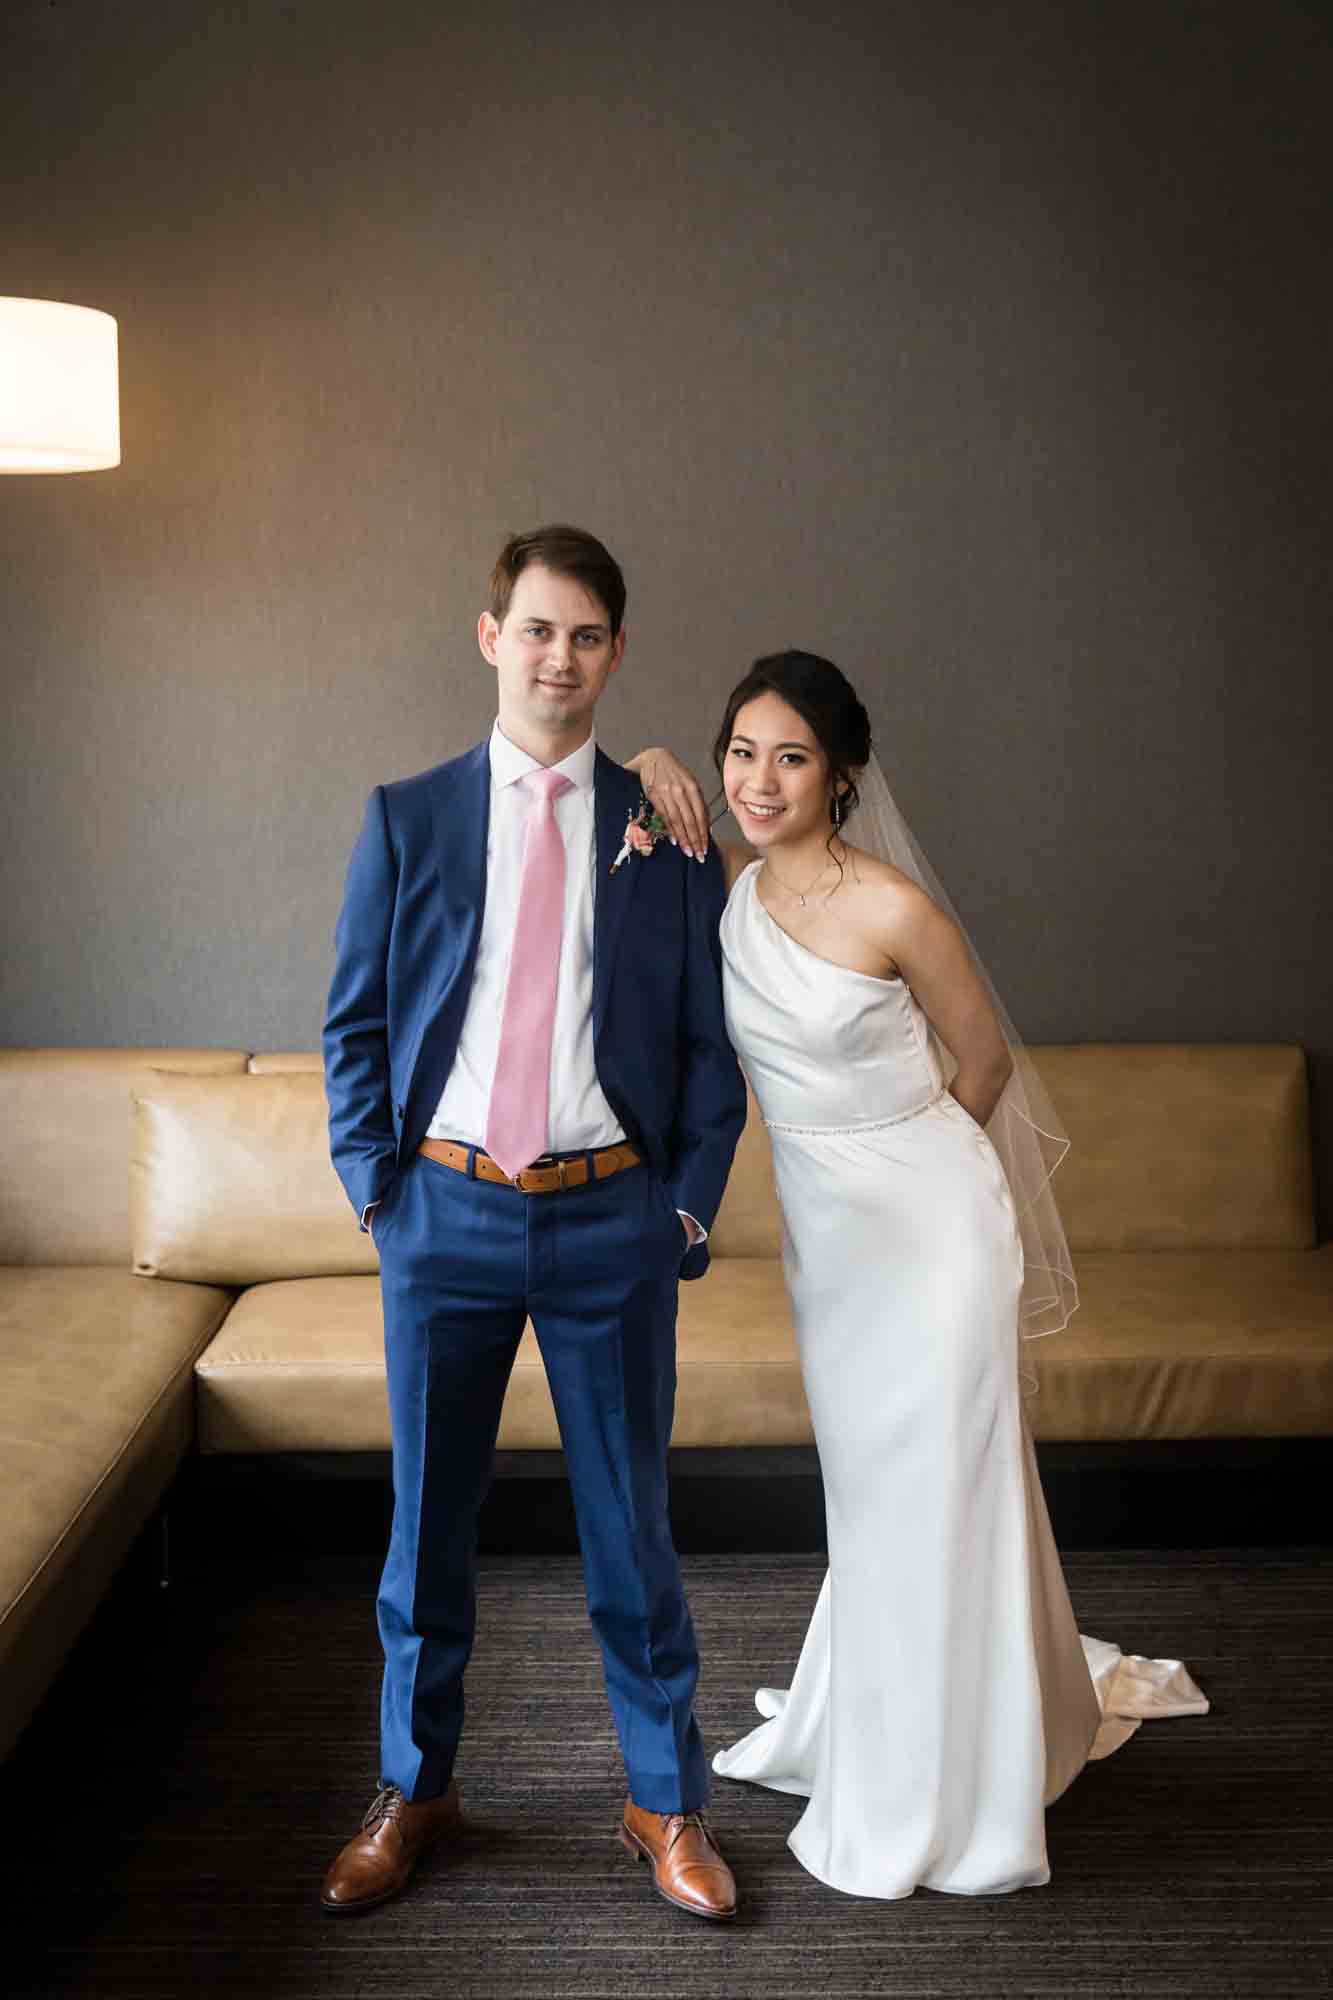 Bride leaning on groom's shoulder in front of couch